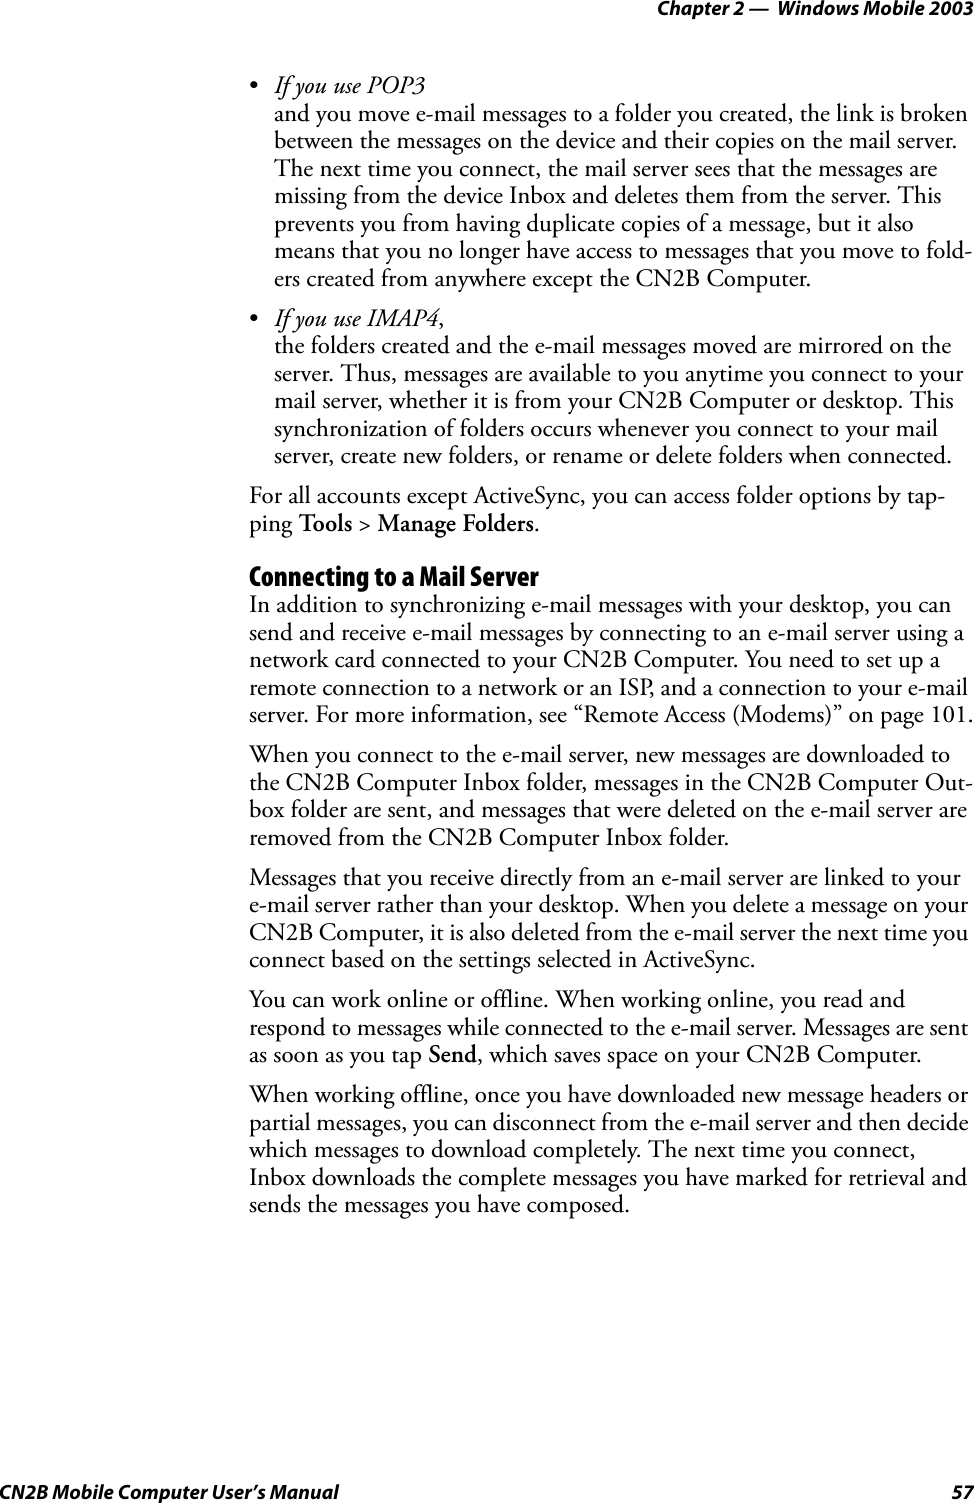 Chapter 2 —  Windows Mobile 2003CN2B Mobile Computer User’s Manual 57•If you use POP3and you move e-mail messages to a folder you created, the link is broken between the messages on the device and their copies on the mail server. The next time you connect, the mail server sees that the messages are missing from the device Inbox and deletes them from the server. This prevents you from having duplicate copies of a message, but it also means that you no longer have access to messages that you move to fold-ers created from anywhere except the CN2B Computer.•If you use IMAP4,the folders created and the e-mail messages moved are mirrored on the server. Thus, messages are available to you anytime you connect to your mail server, whether it is from your CN2B Computer or desktop. This synchronization of folders occurs whenever you connect to your mail server, create new folders, or rename or delete folders when connected.For all accounts except ActiveSync, you can access folder options by tap-ping To o l s  &gt; Manage Folders.Connecting to a Mail ServerIn addition to synchronizing e-mail messages with your desktop, you can send and receive e-mail messages by connecting to an e-mail server using a network card connected to your CN2B Computer. You need to set up a remote connection to a network or an ISP, and a connection to your e-mail server. For more information, see “Remote Access (Modems)” on page 101.When you connect to the e-mail server, new messages are downloaded to the CN2B Computer Inbox folder, messages in the CN2B Computer Out-box folder are sent, and messages that were deleted on the e-mail server are removed from the CN2B Computer Inbox folder.Messages that you receive directly from an e-mail server are linked to your e-mail server rather than your desktop. When you delete a message on your CN2B Computer, it is also deleted from the e-mail server the next time you connect based on the settings selected in ActiveSync.You can work online or offline. When working online, you read and respond to messages while connected to the e-mail server. Messages are sent as soon as you tap Send, which saves space on your CN2B Computer.When working offline, once you have downloaded new message headers or partial messages, you can disconnect from the e-mail server and then decide which messages to download completely. The next time you connect, Inbox downloads the complete messages you have marked for retrieval and sends the messages you have composed.